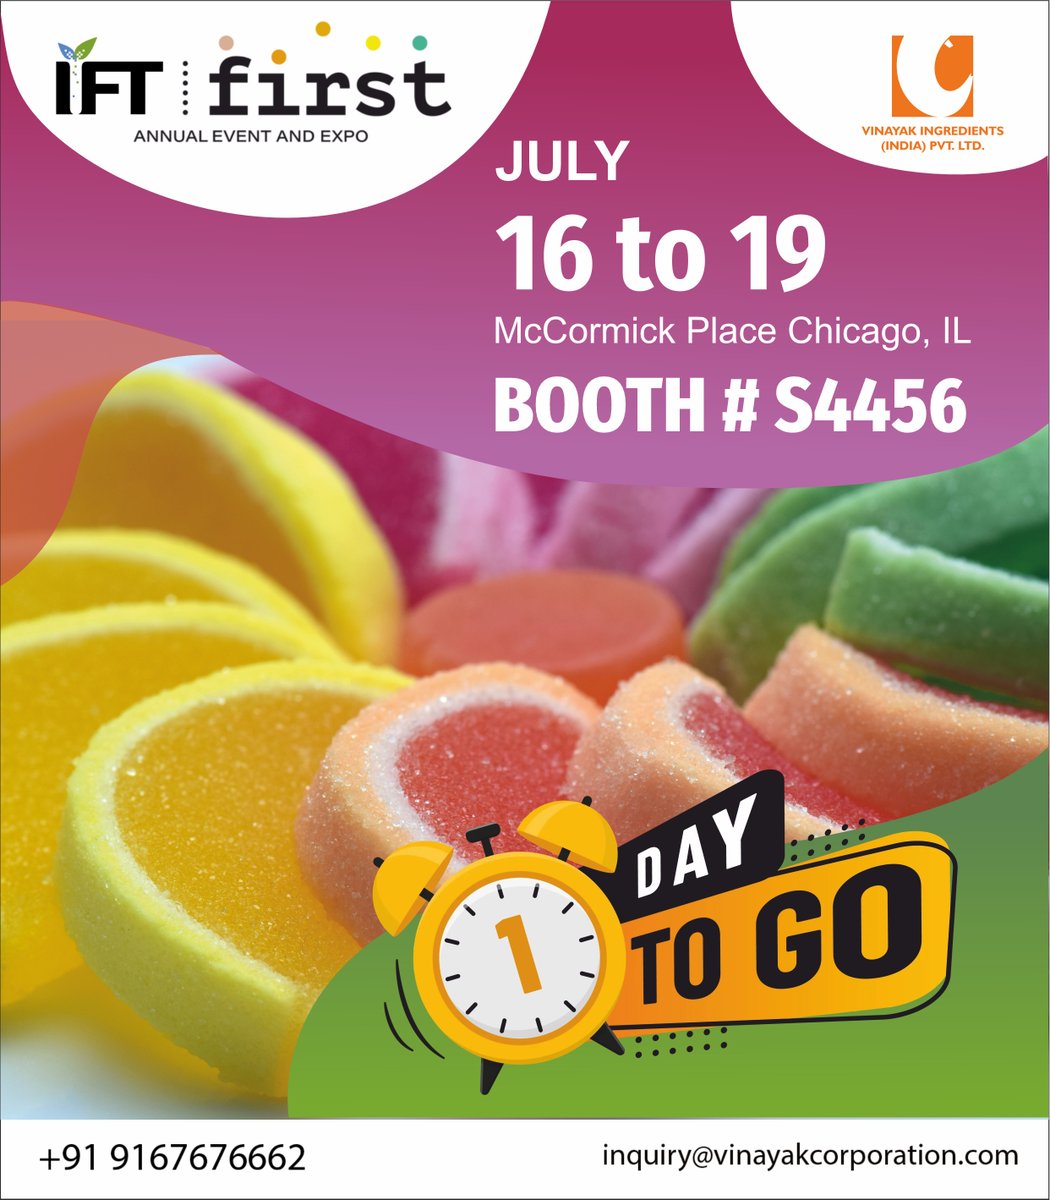 Only 1 day to go! We would like to invite you to our booth to explore a wide range of plant-based ingredients.
See you there! #IFT2023

#IFT #VinayakCorporation #VinayakIngredients #JoinUs #Exhibition2023 #IFTFirst #NaturalFoodColor #India #innovation #future #foodindustry #food